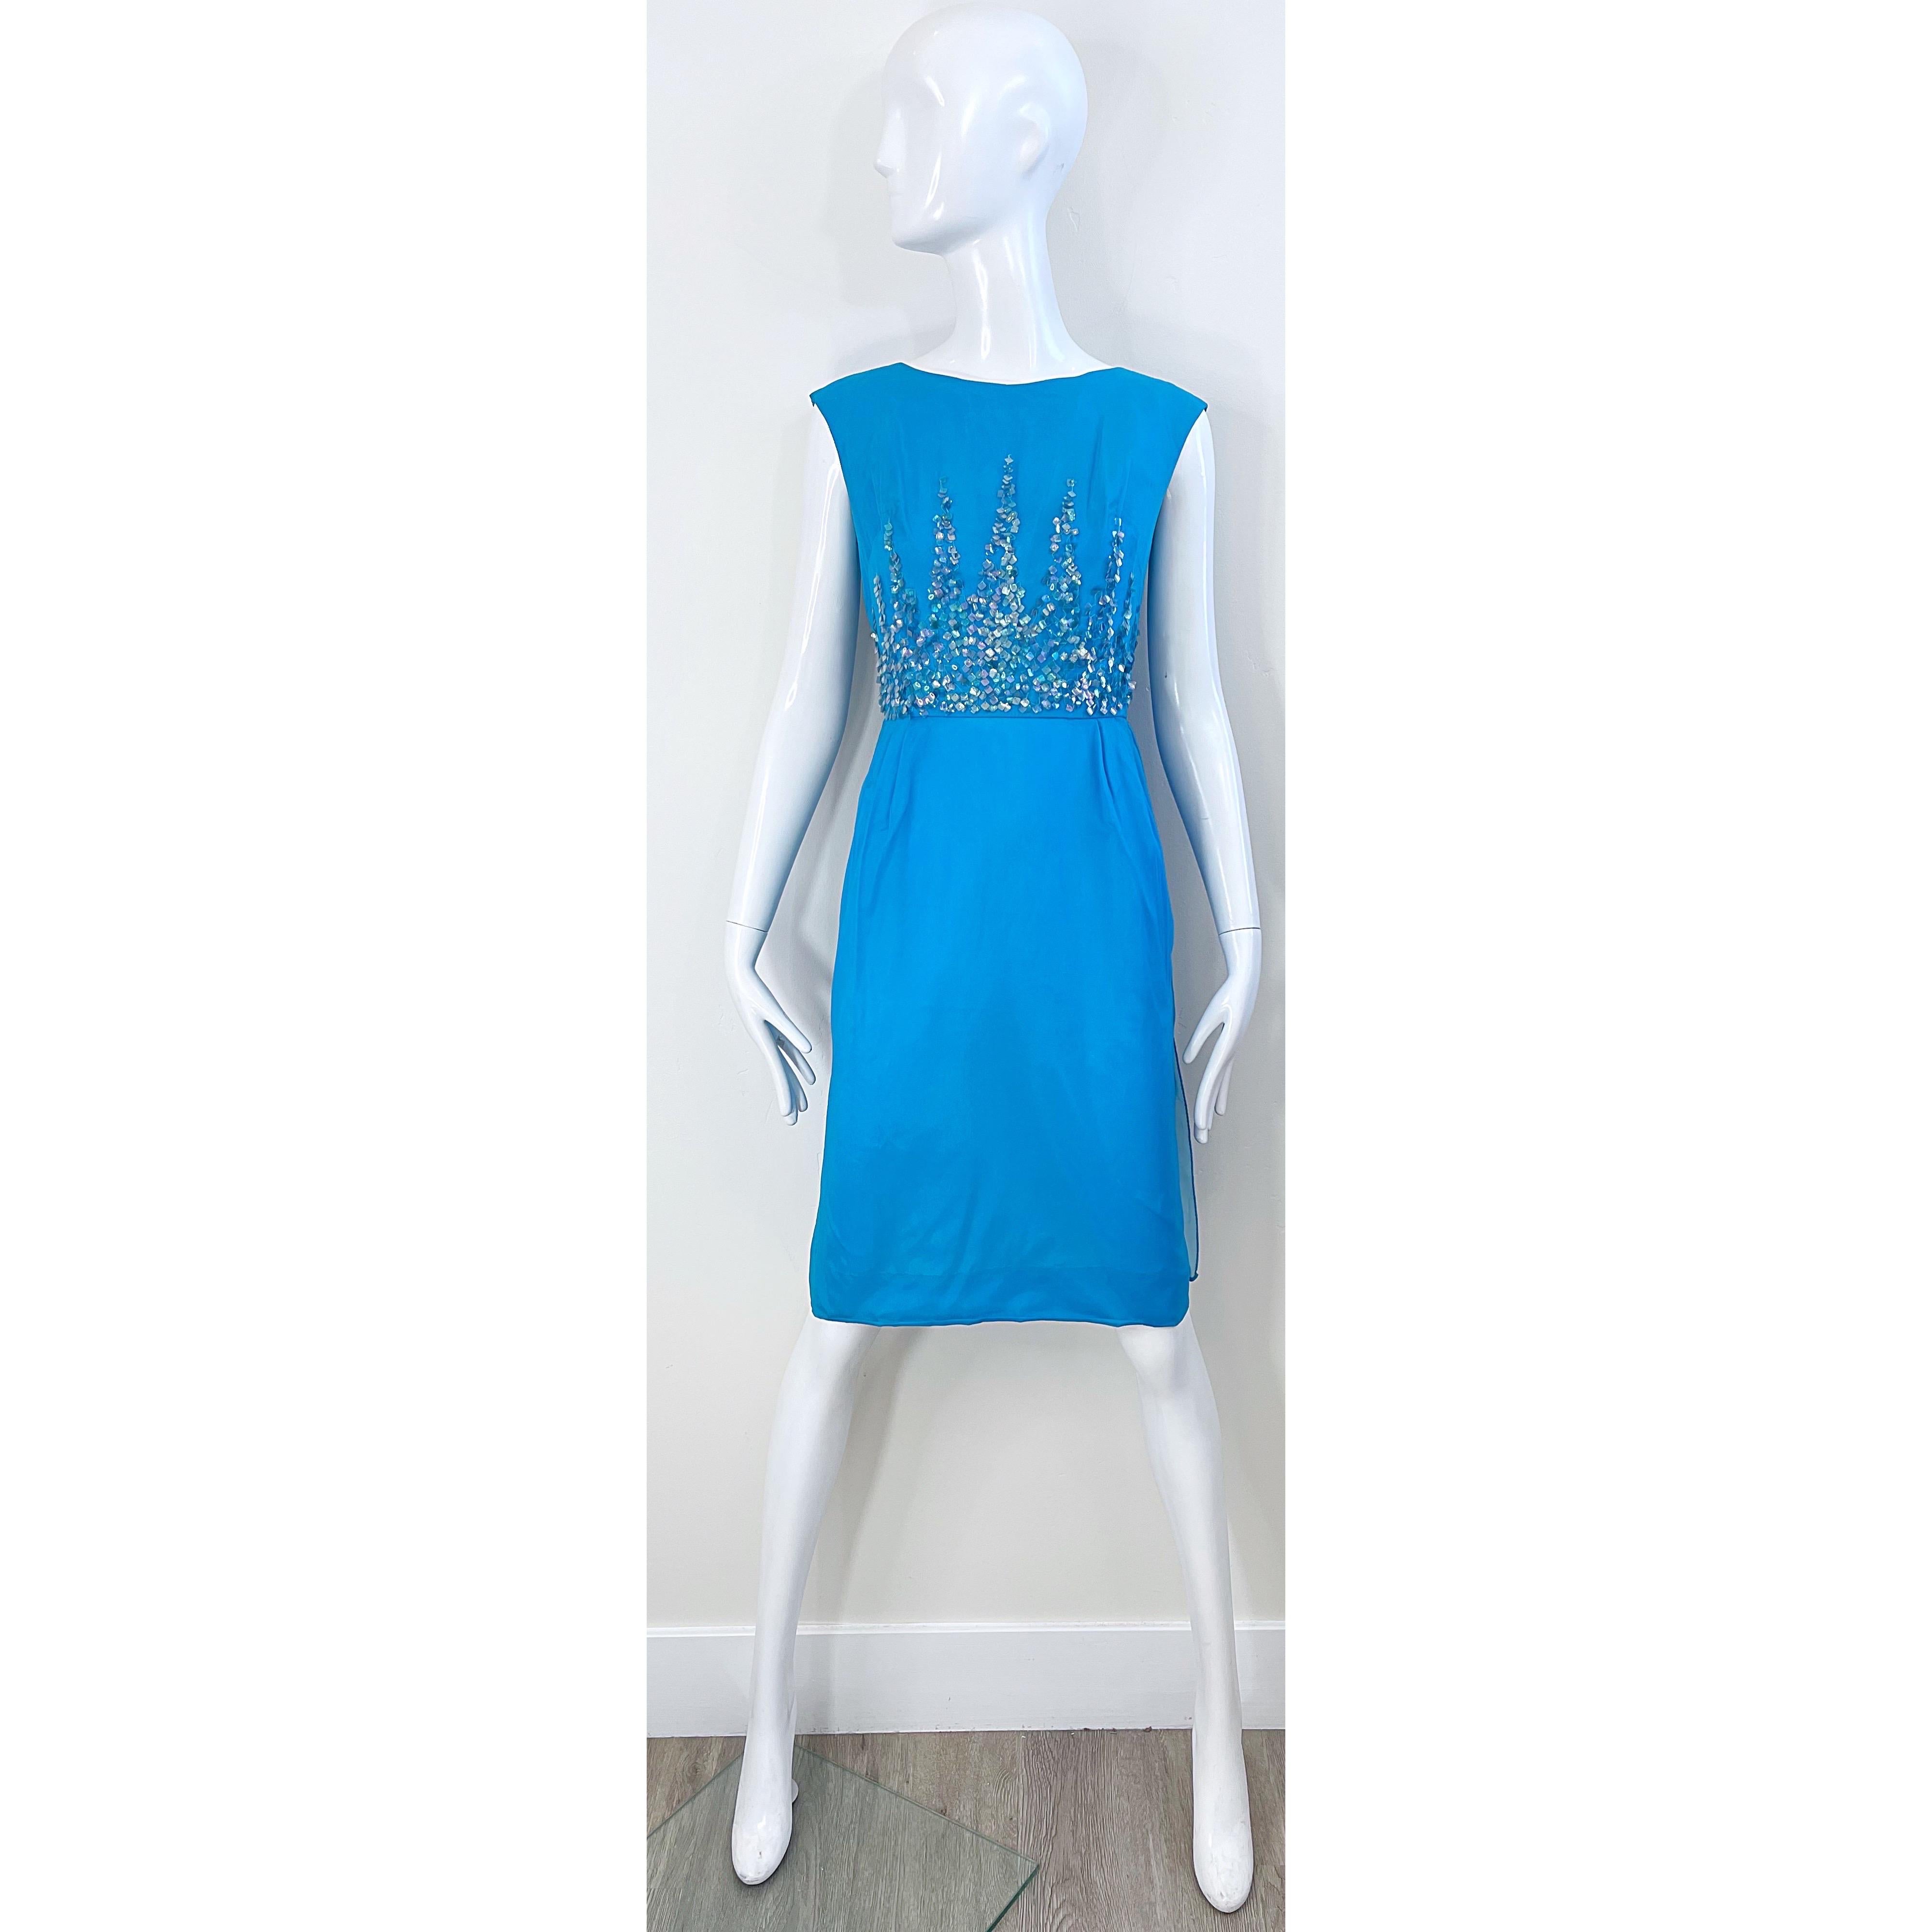 Beautiful vintage 60s demi couture turquoise blue silk chiffon paillette sequin encrusted dress ! Features a tailored bodice encrusted with hundreds of iridescent paillttes. Two panels of chiffon on the back with full mental zipper and hook-and-eye